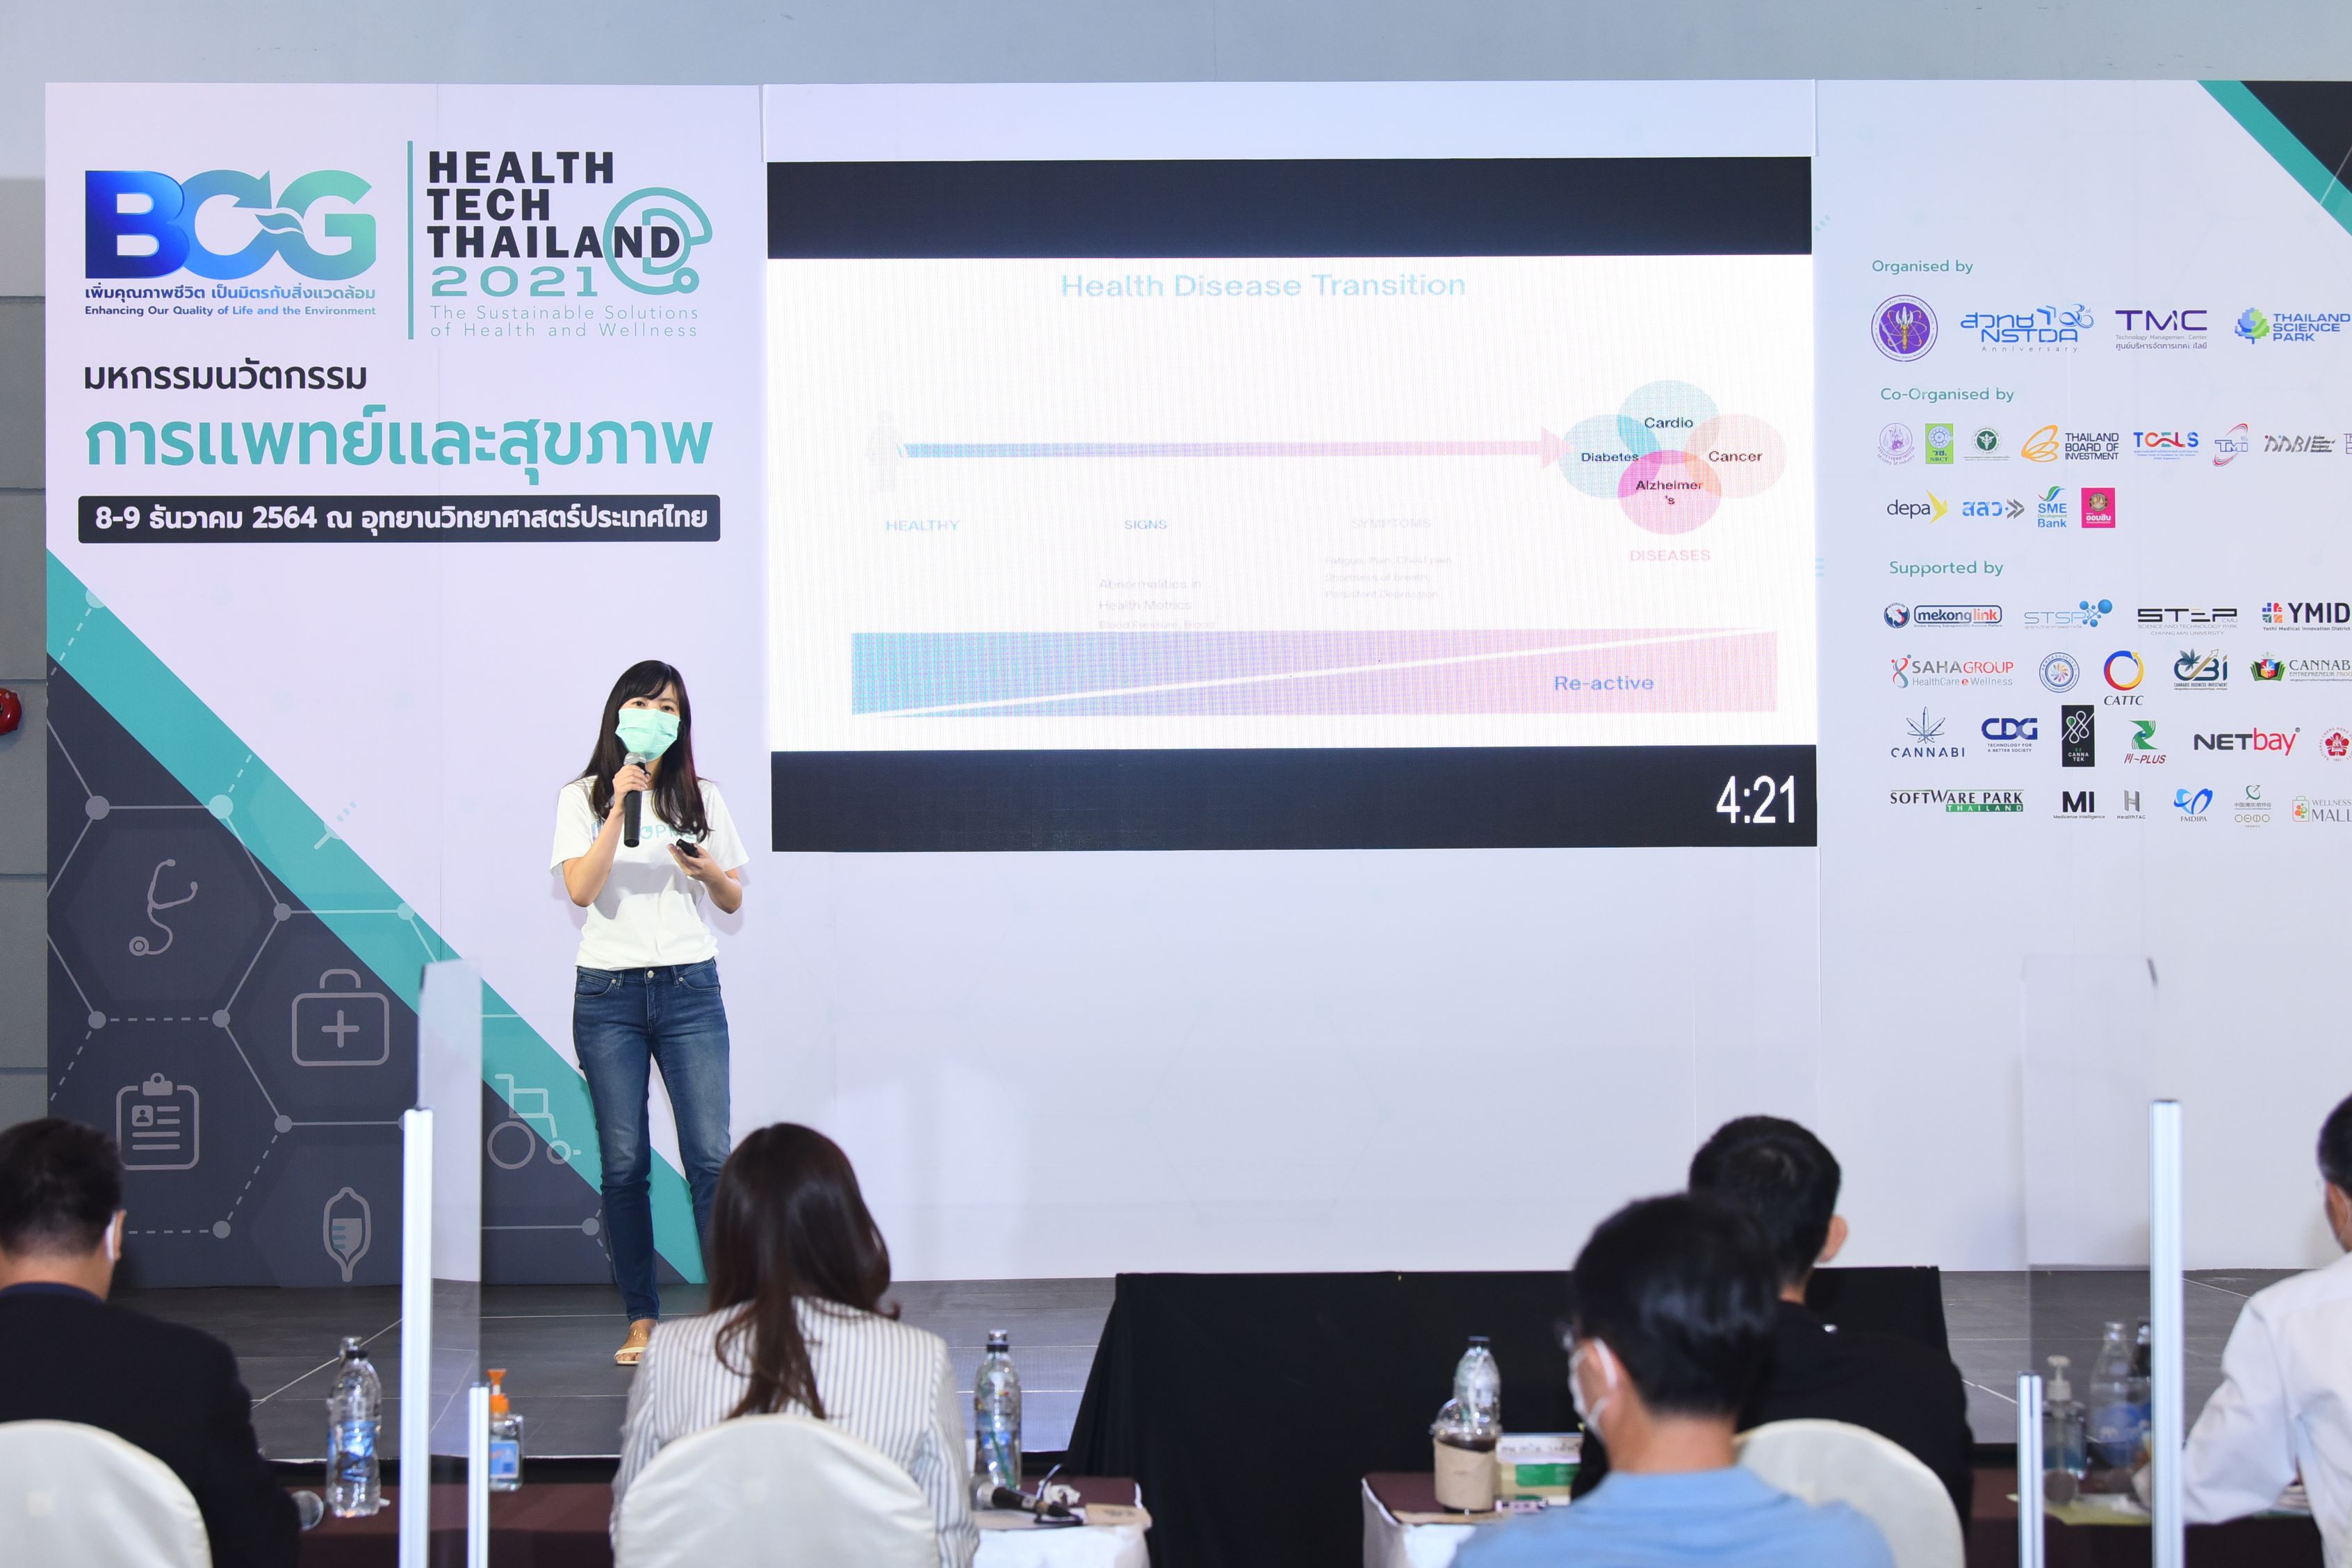 Pitching at "Health Tech StartUp" event 